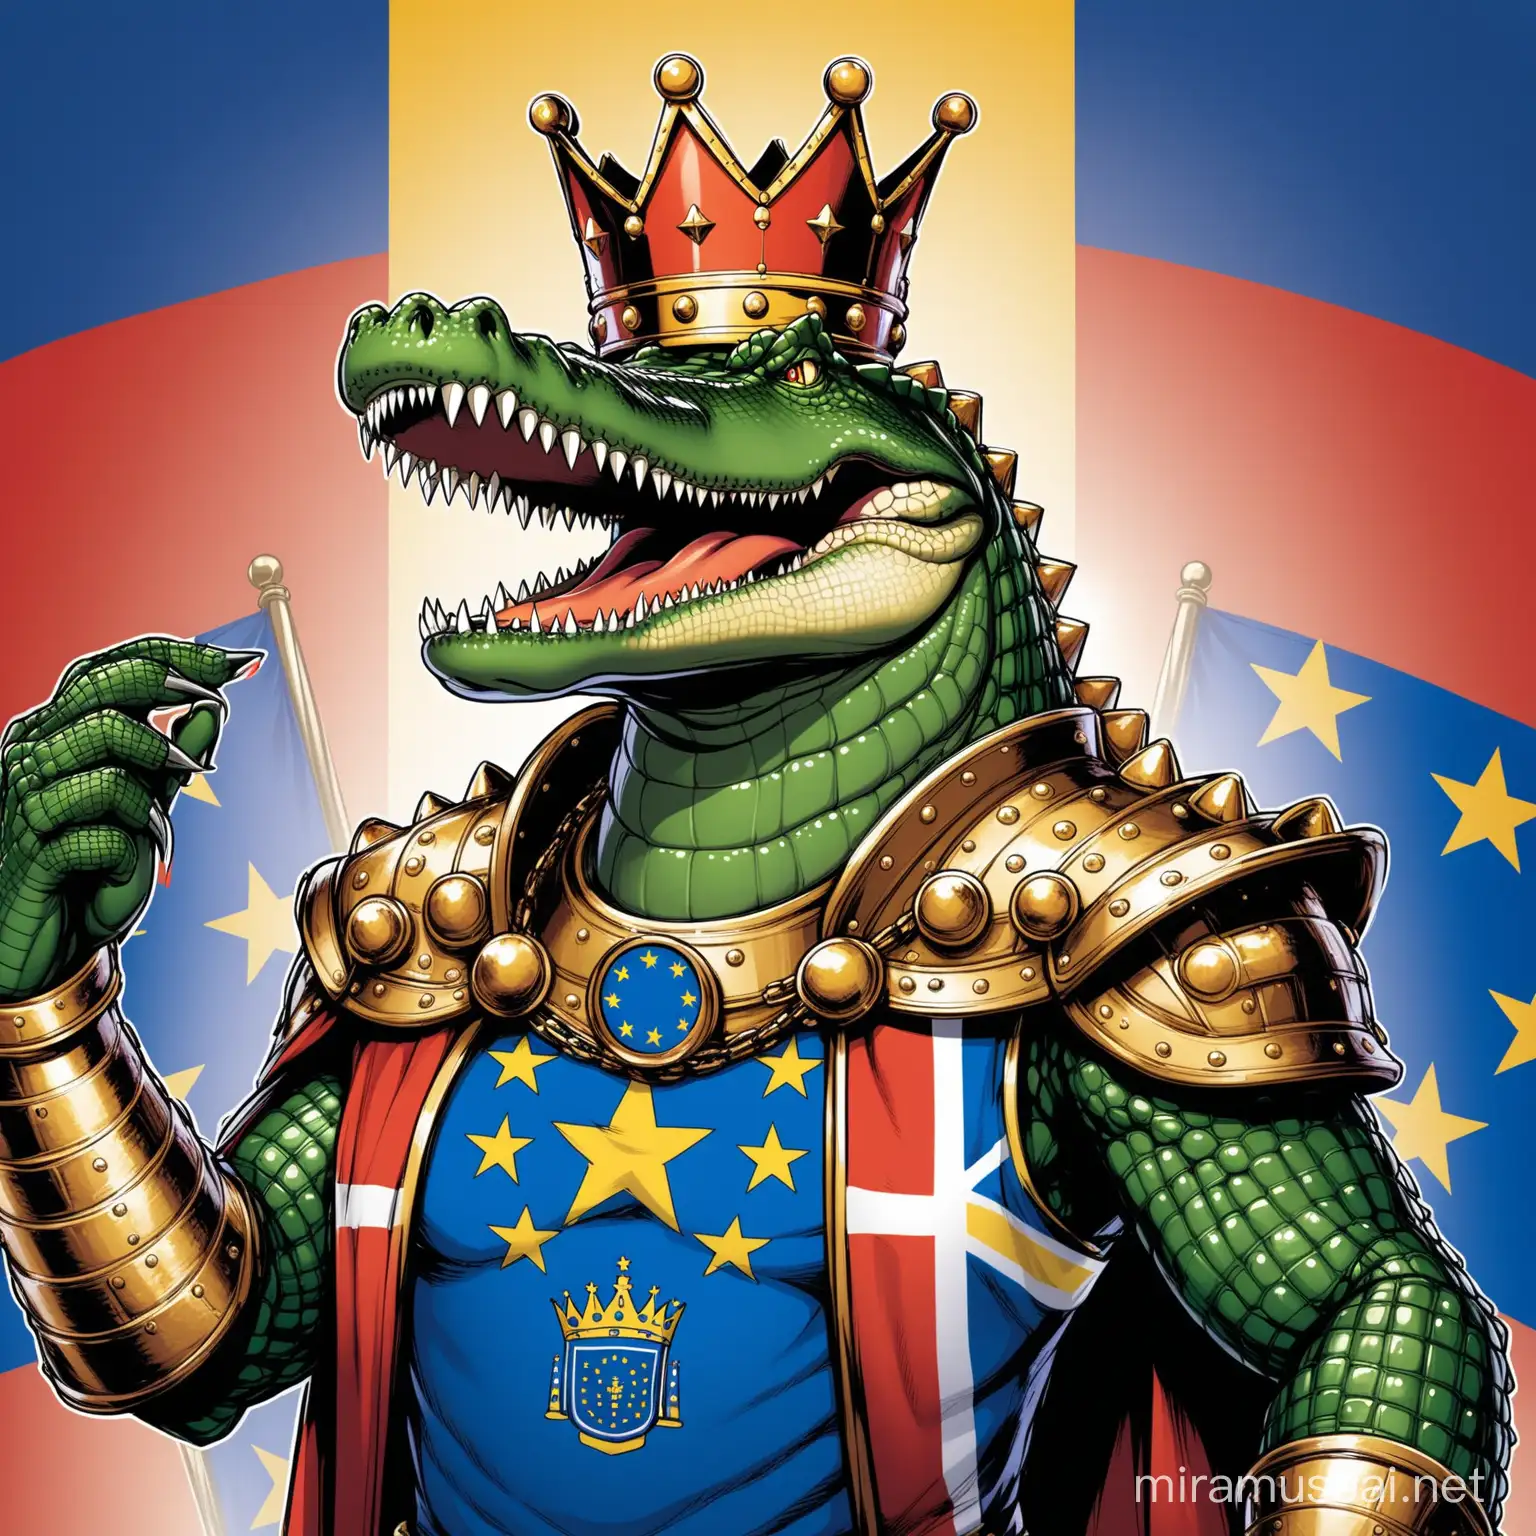 The leader of the unified European Union as crocodile wearing a crown and the gauntlet. The European Union's flag is seen in the background.